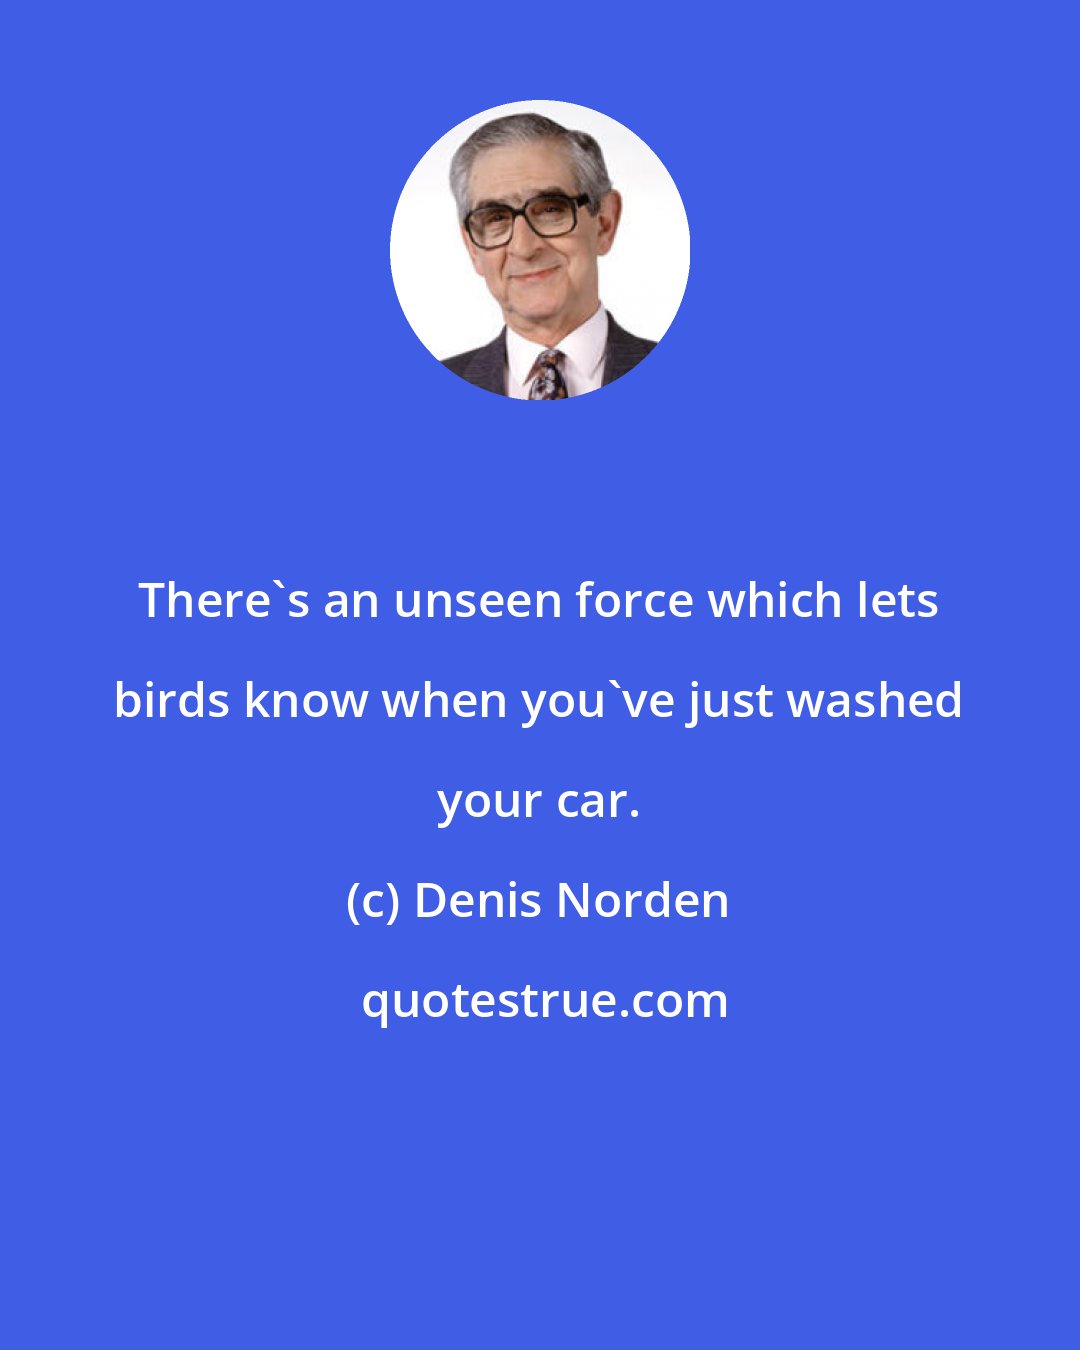 Denis Norden: There's an unseen force which lets birds know when you've just washed your car.